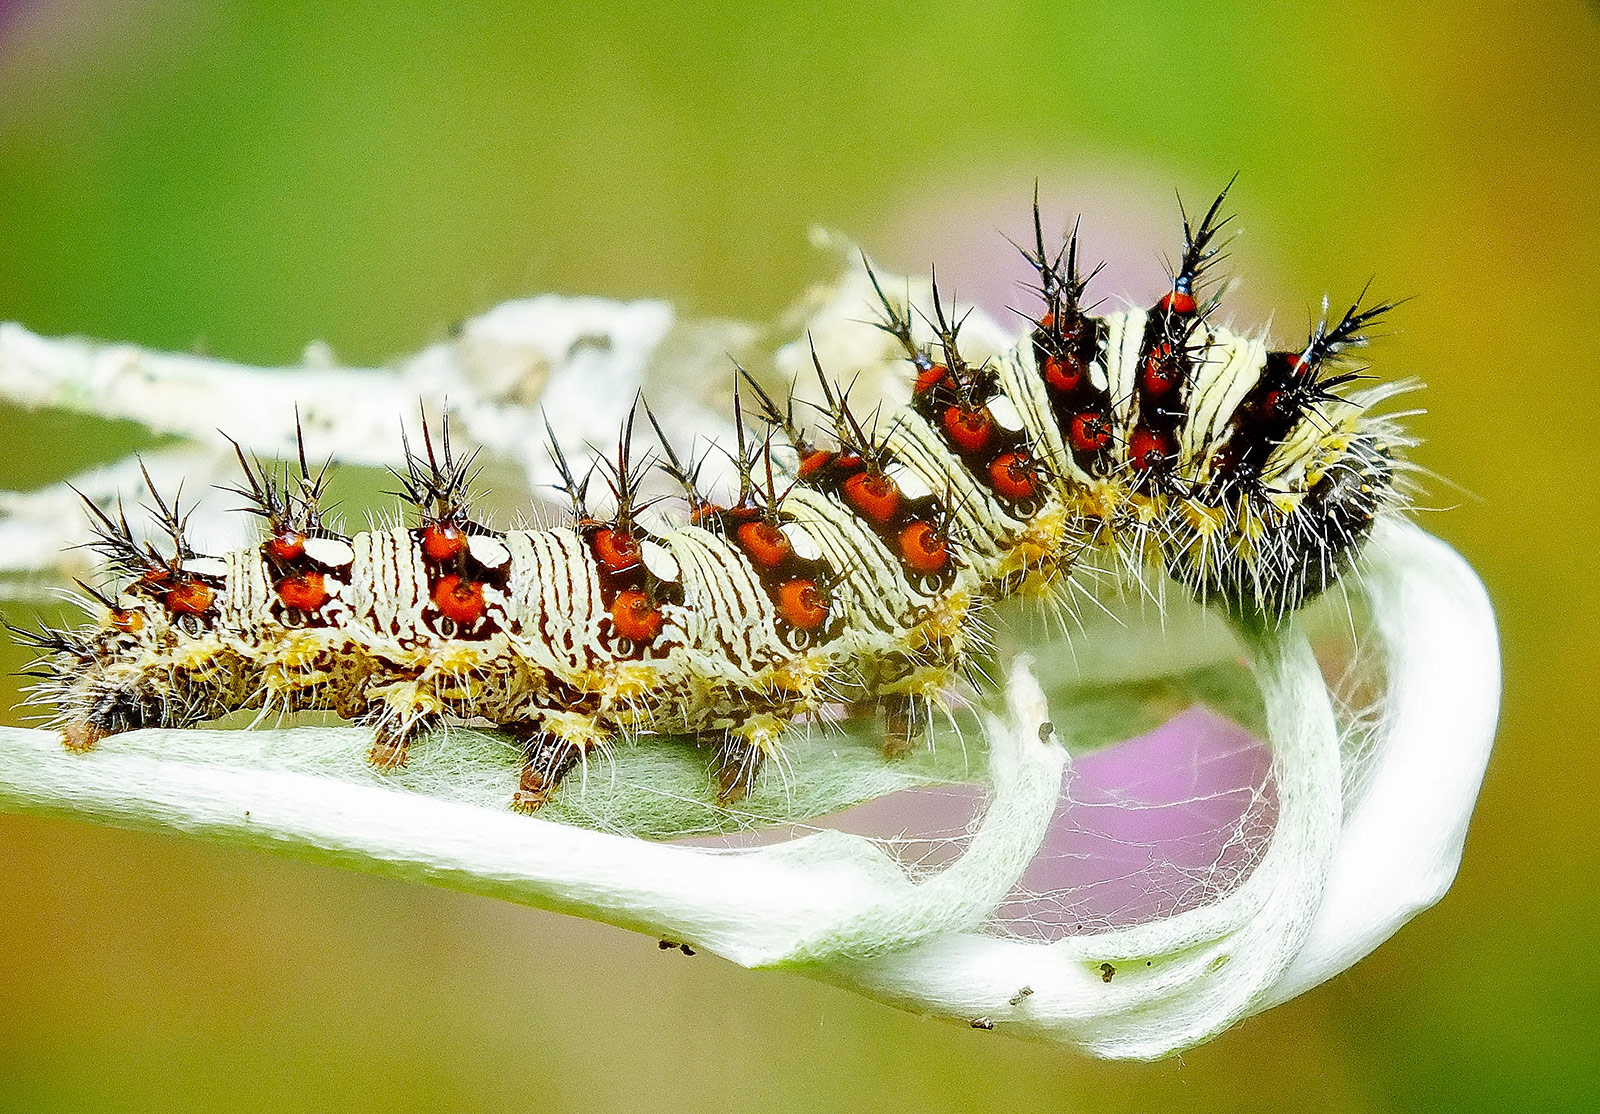 American painted lady caterpillar